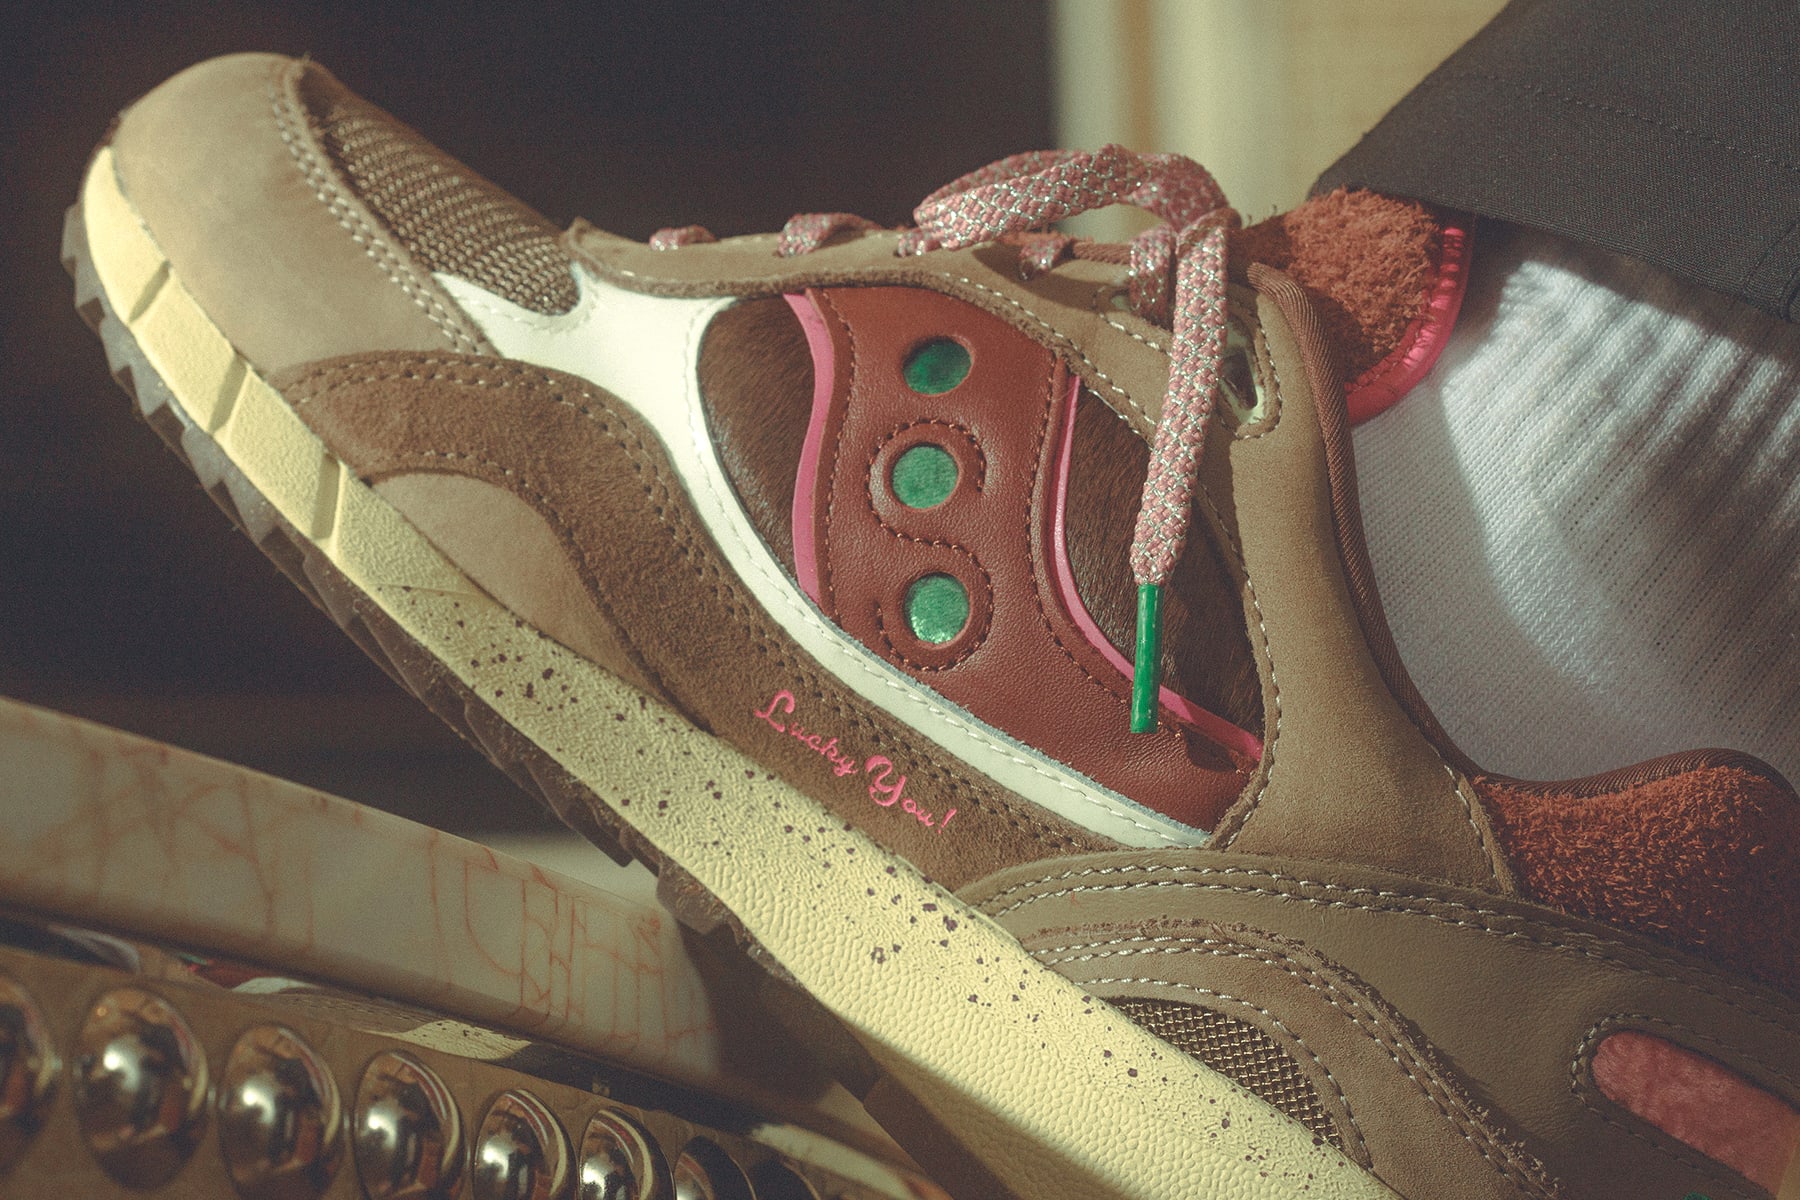 Feature x Saucony Shadow 6000 &#x27;Chocolate Chip&#x27;